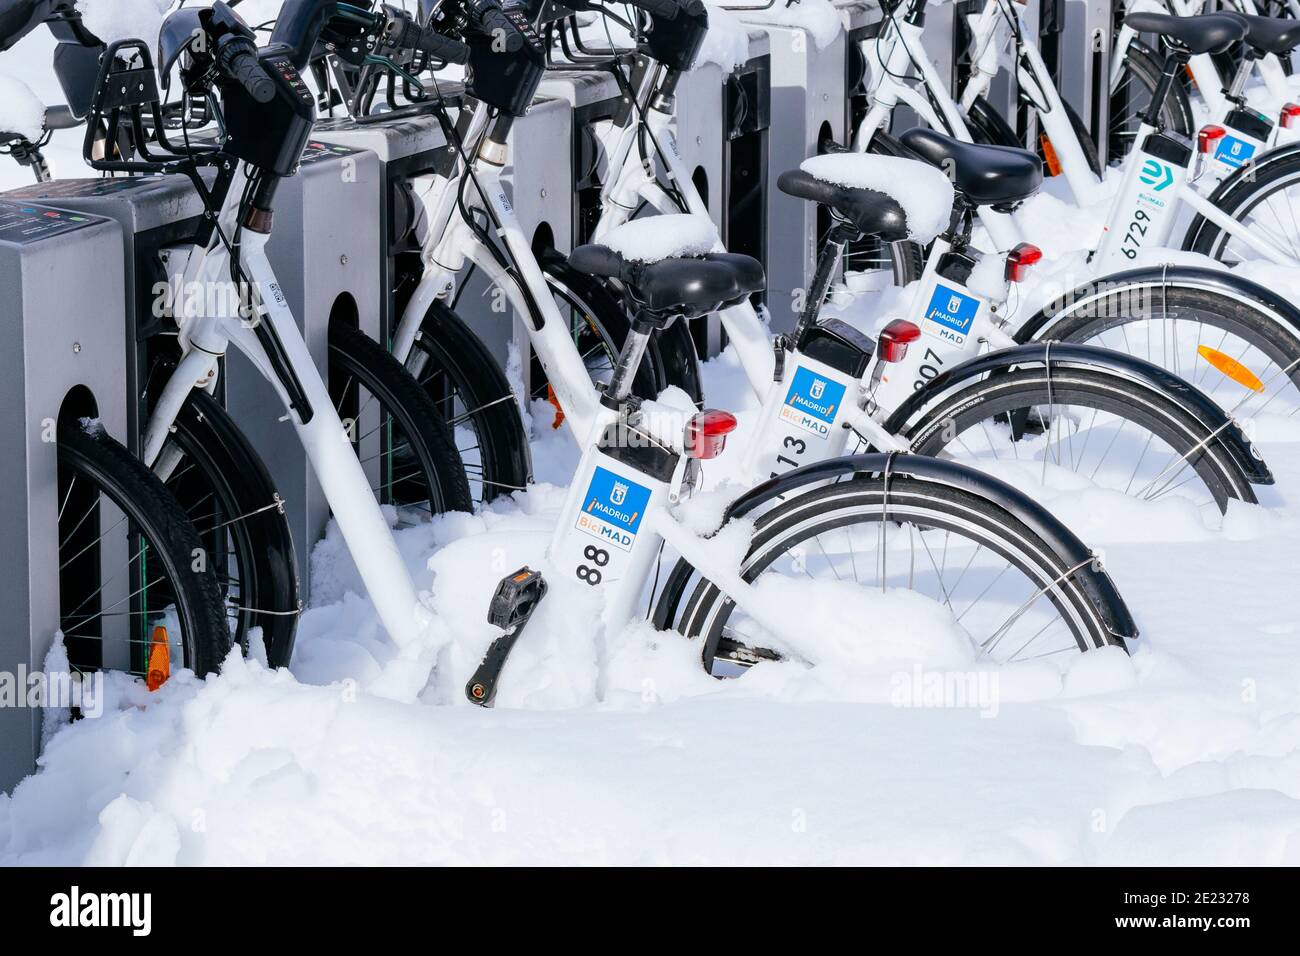 Bicycles of the municipal service of Madrid, BICIMAD, covered with snow parked in the station. The day after Filomena heavy snowfall. Madrid, Spain Stock Photo